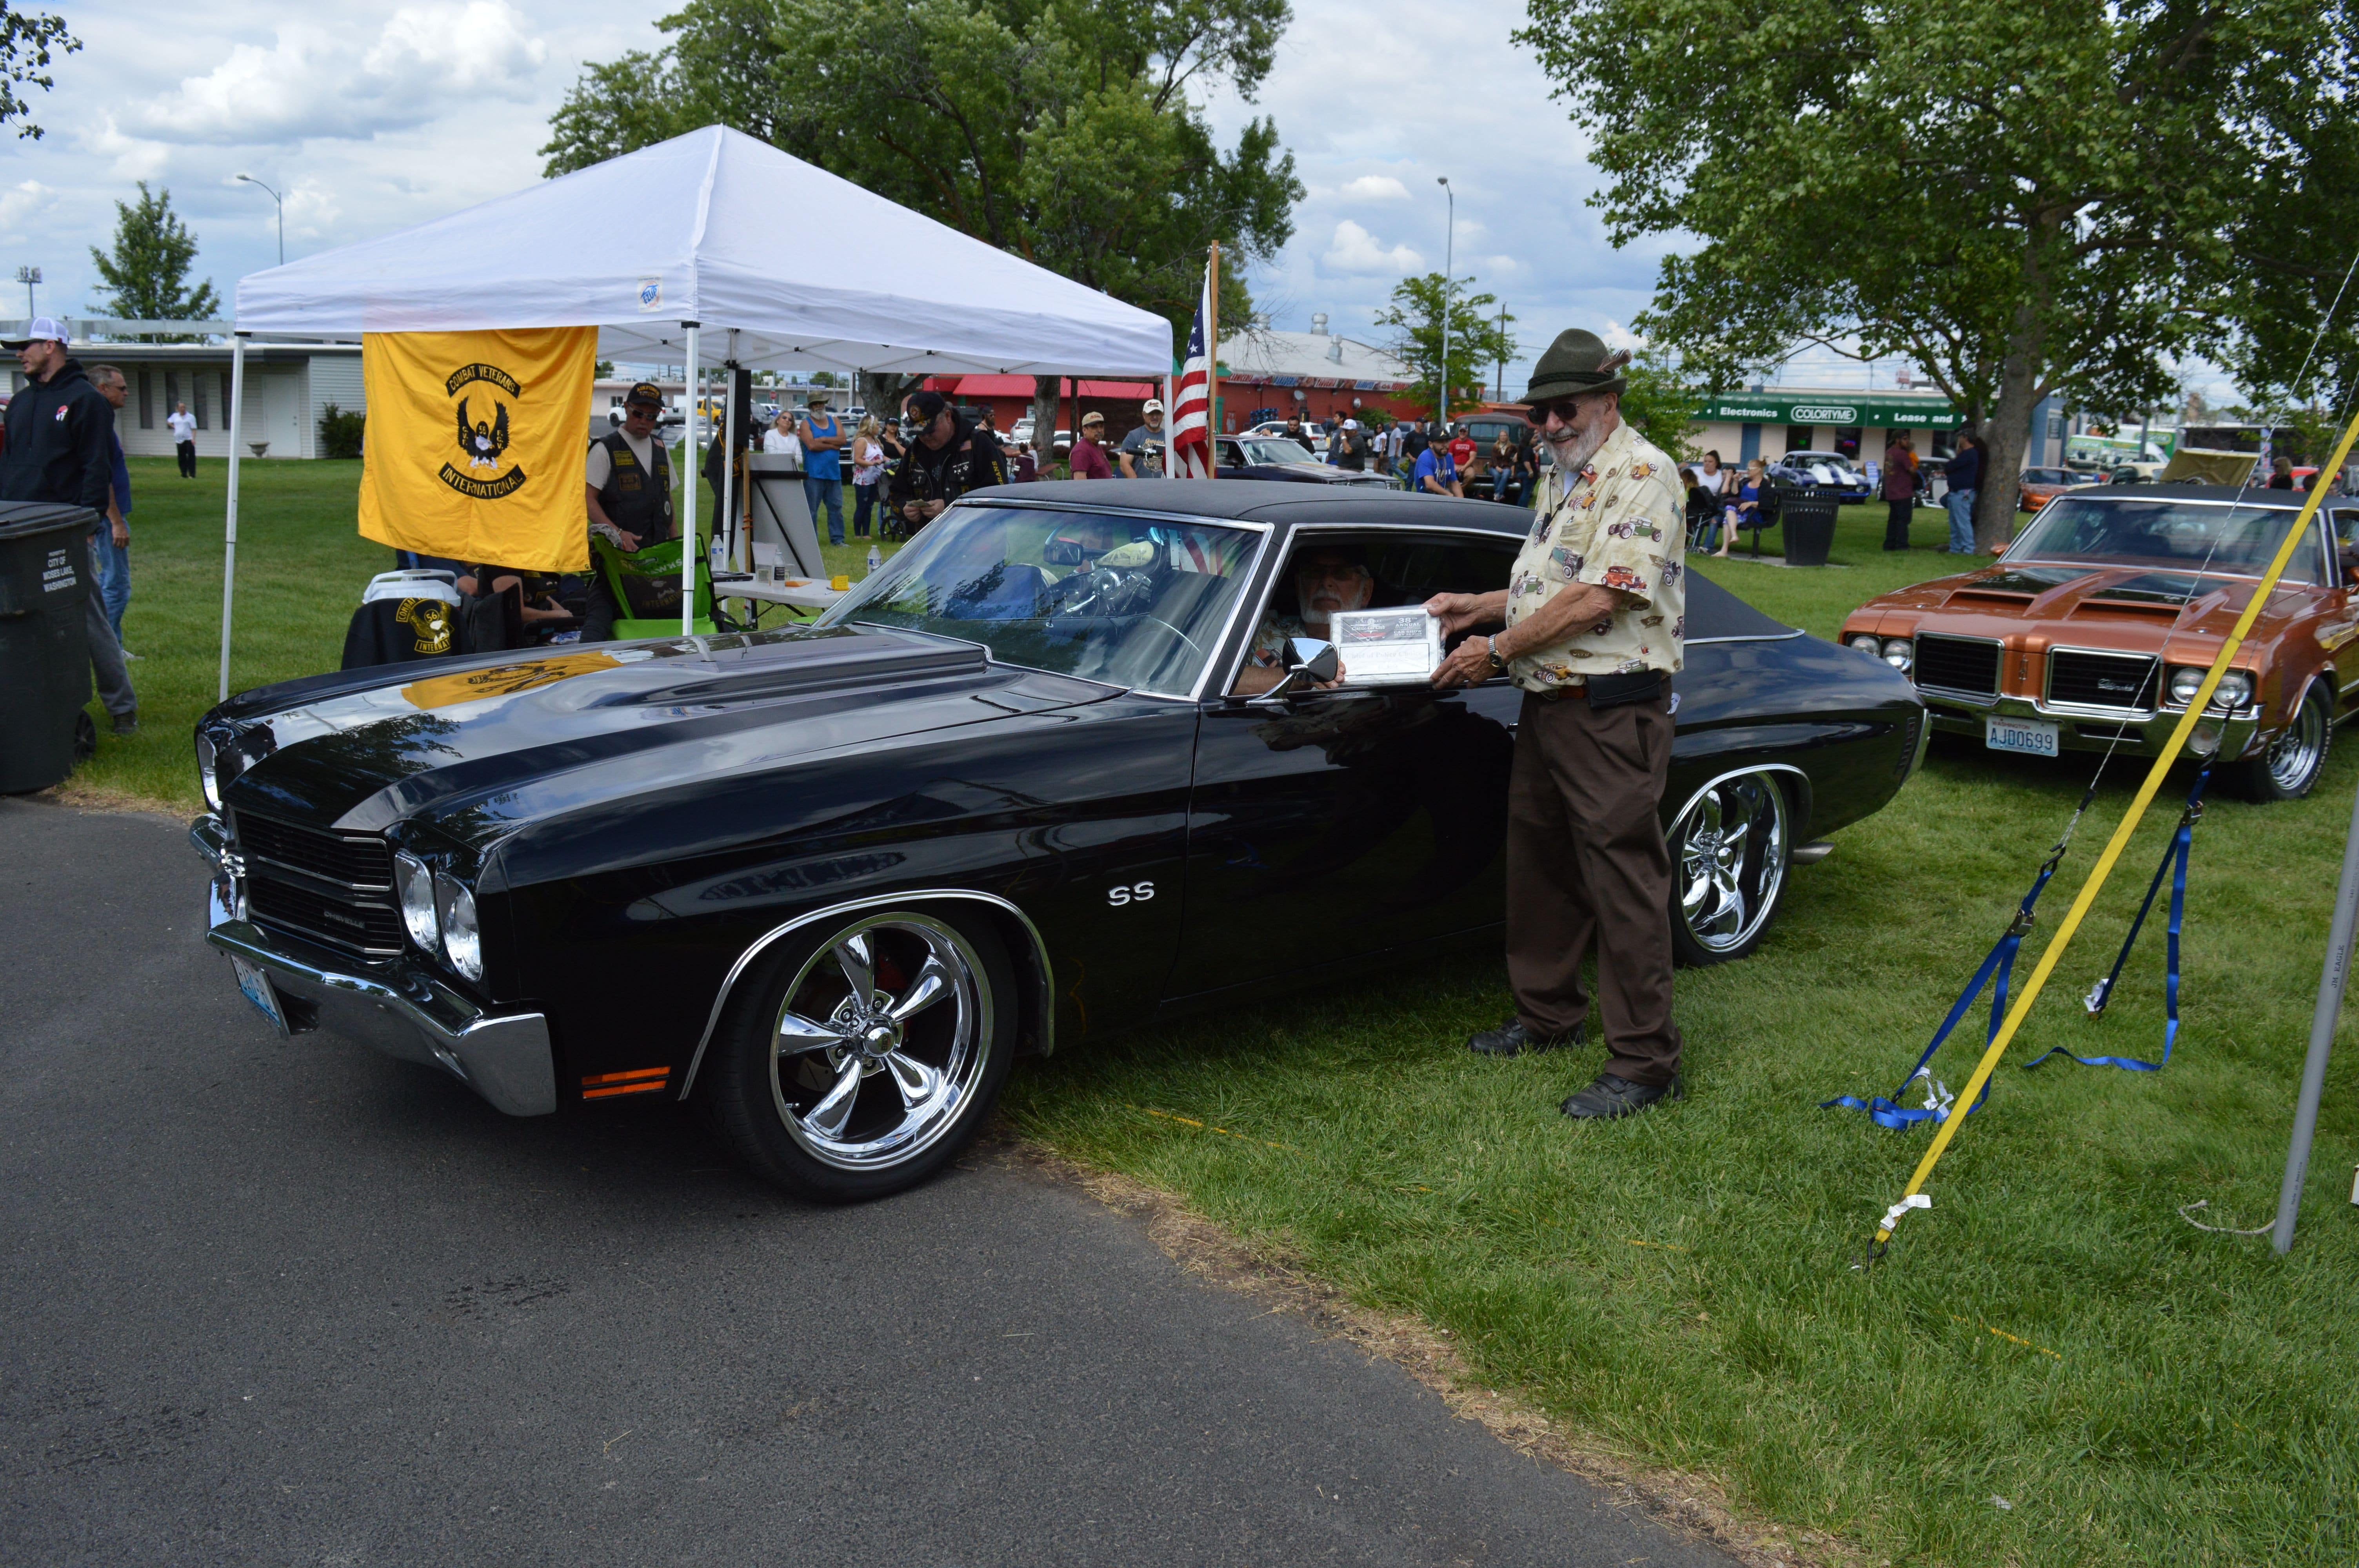 1970 Chevy Chevelle - Chief of Police Choice - Mike Treadwell